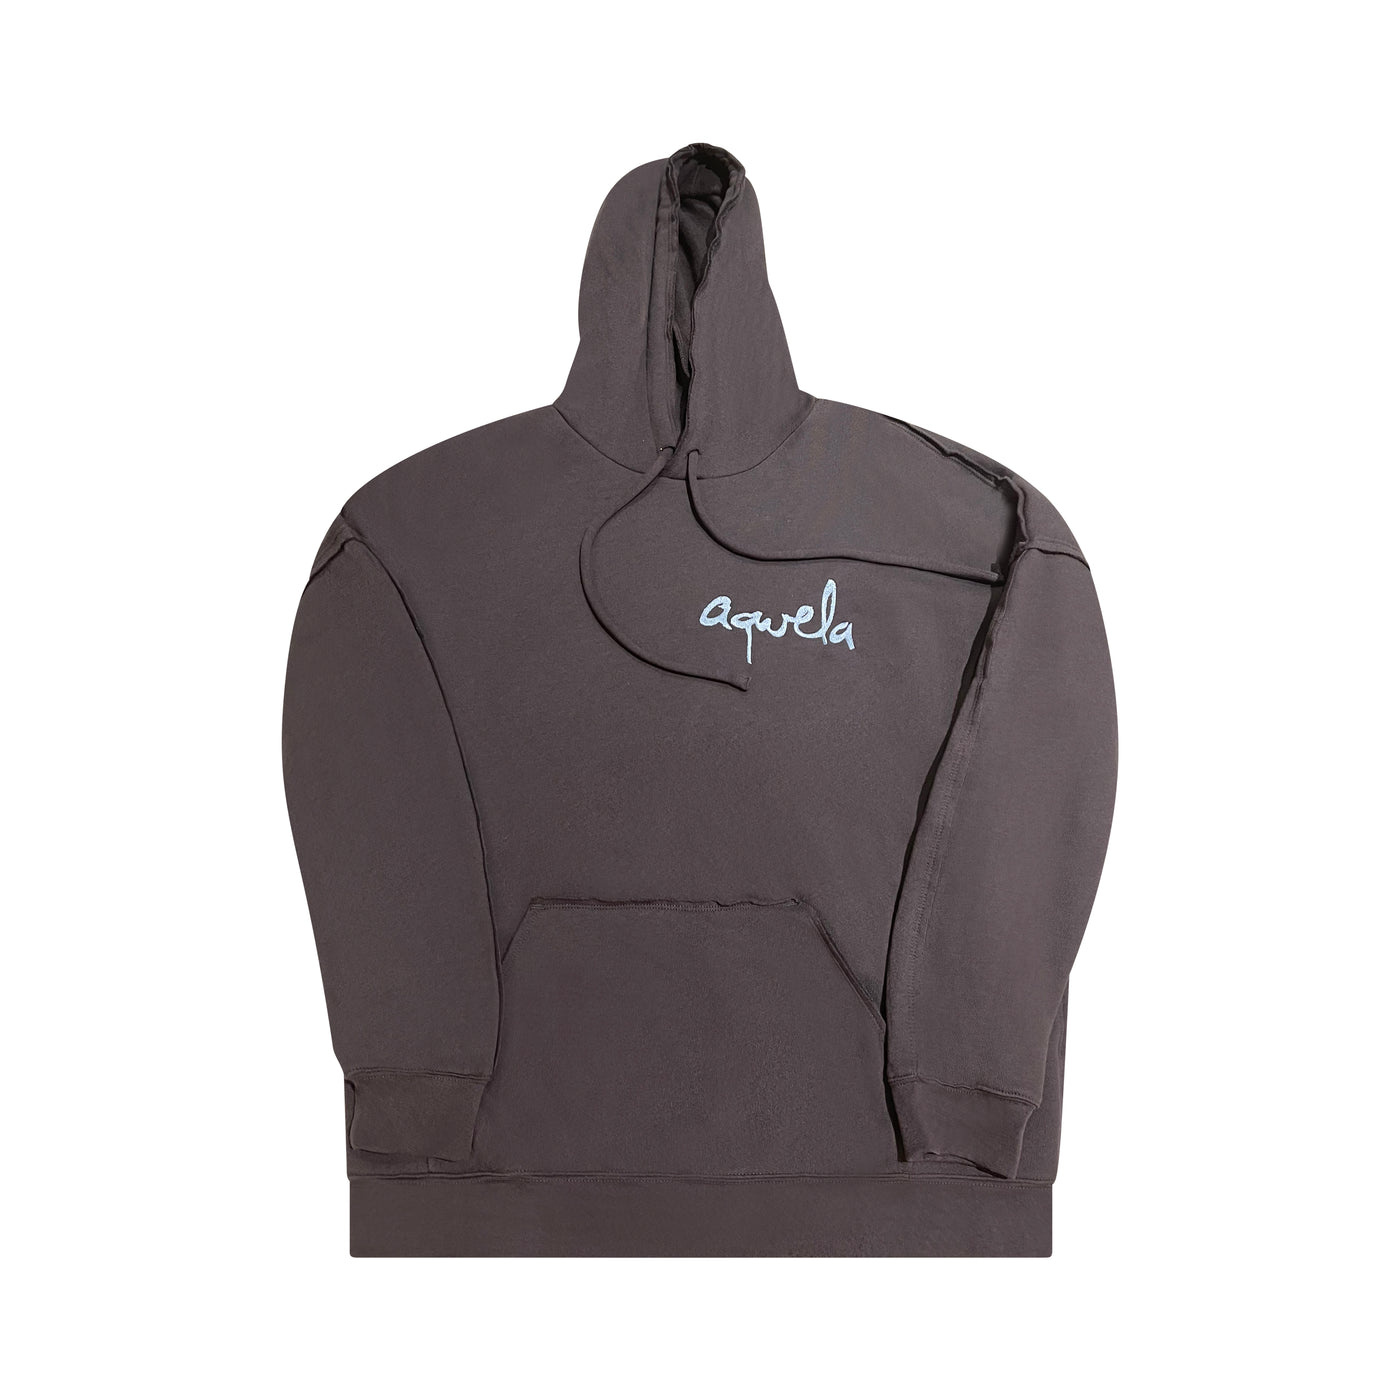 Faith - Grey embroidered Hoodie